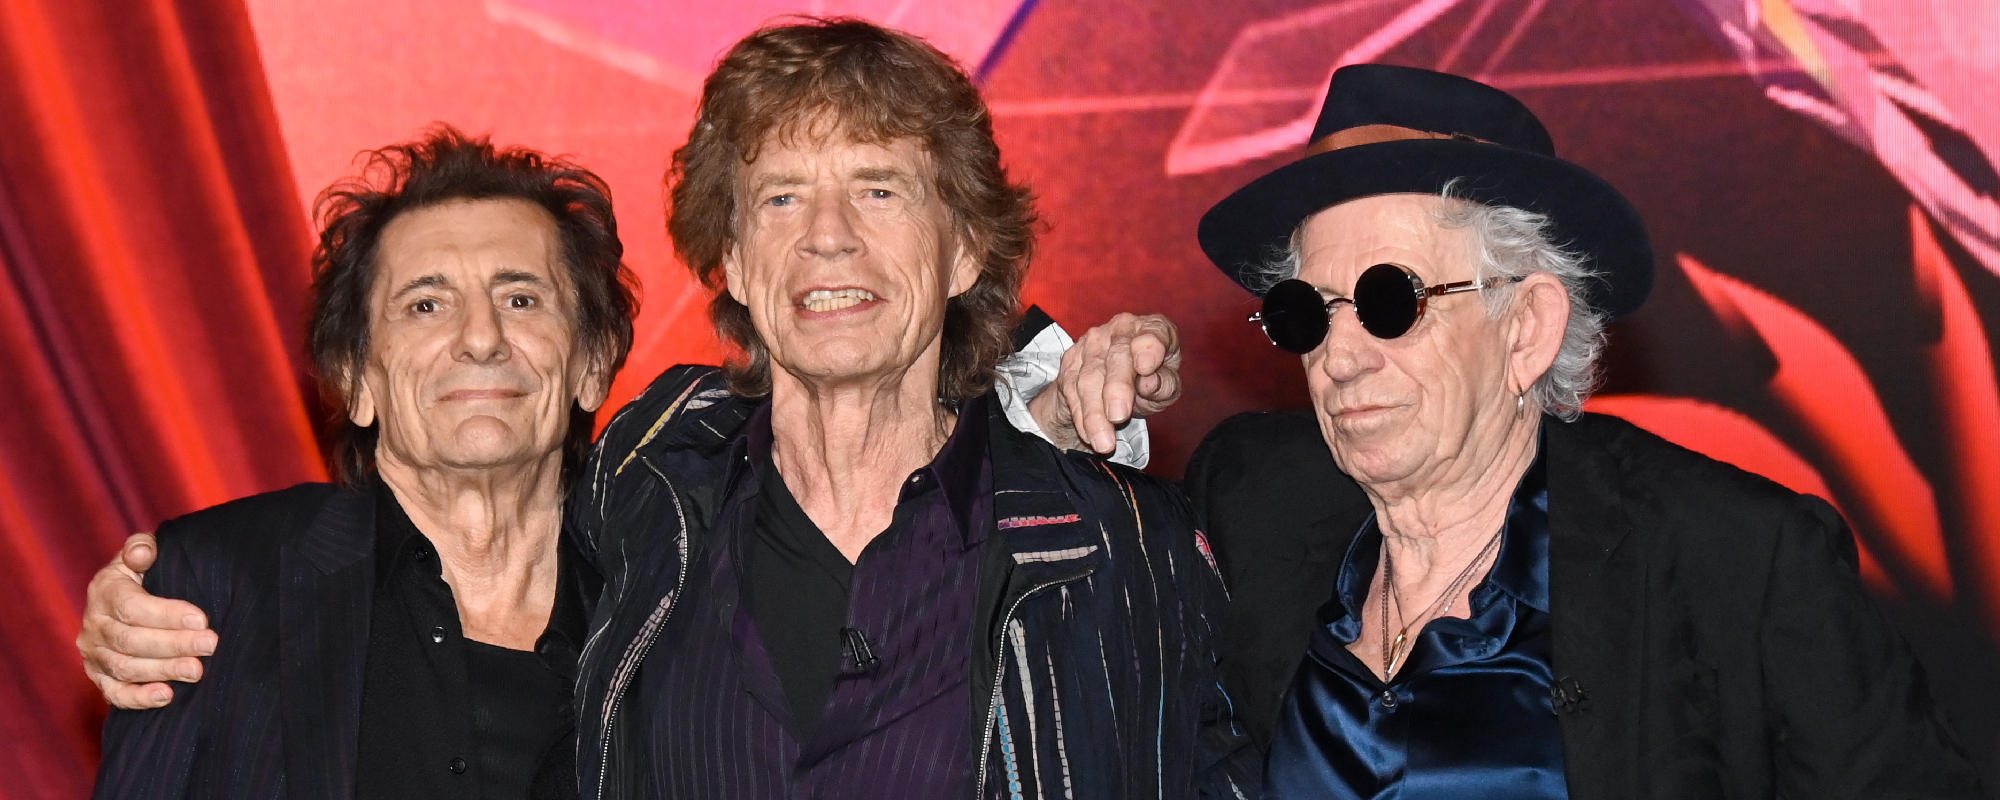 The Rolling Stones Share Exclusive 2002 Performance of “Dance, Part 1” Live at the Wiltern